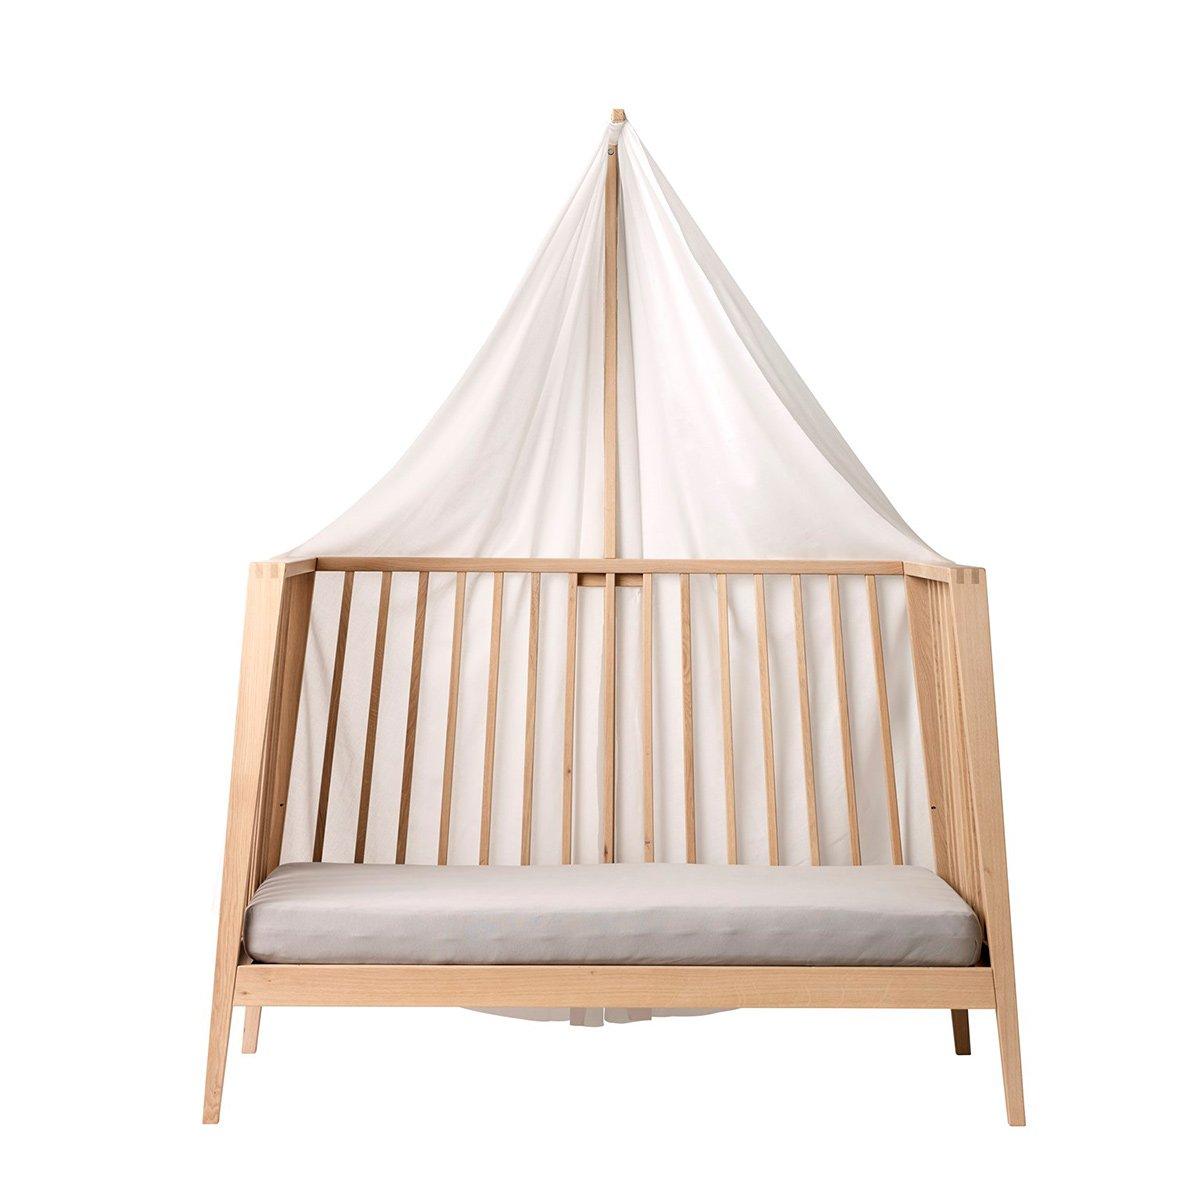 Leander: A canopy for Luna and Linea cot